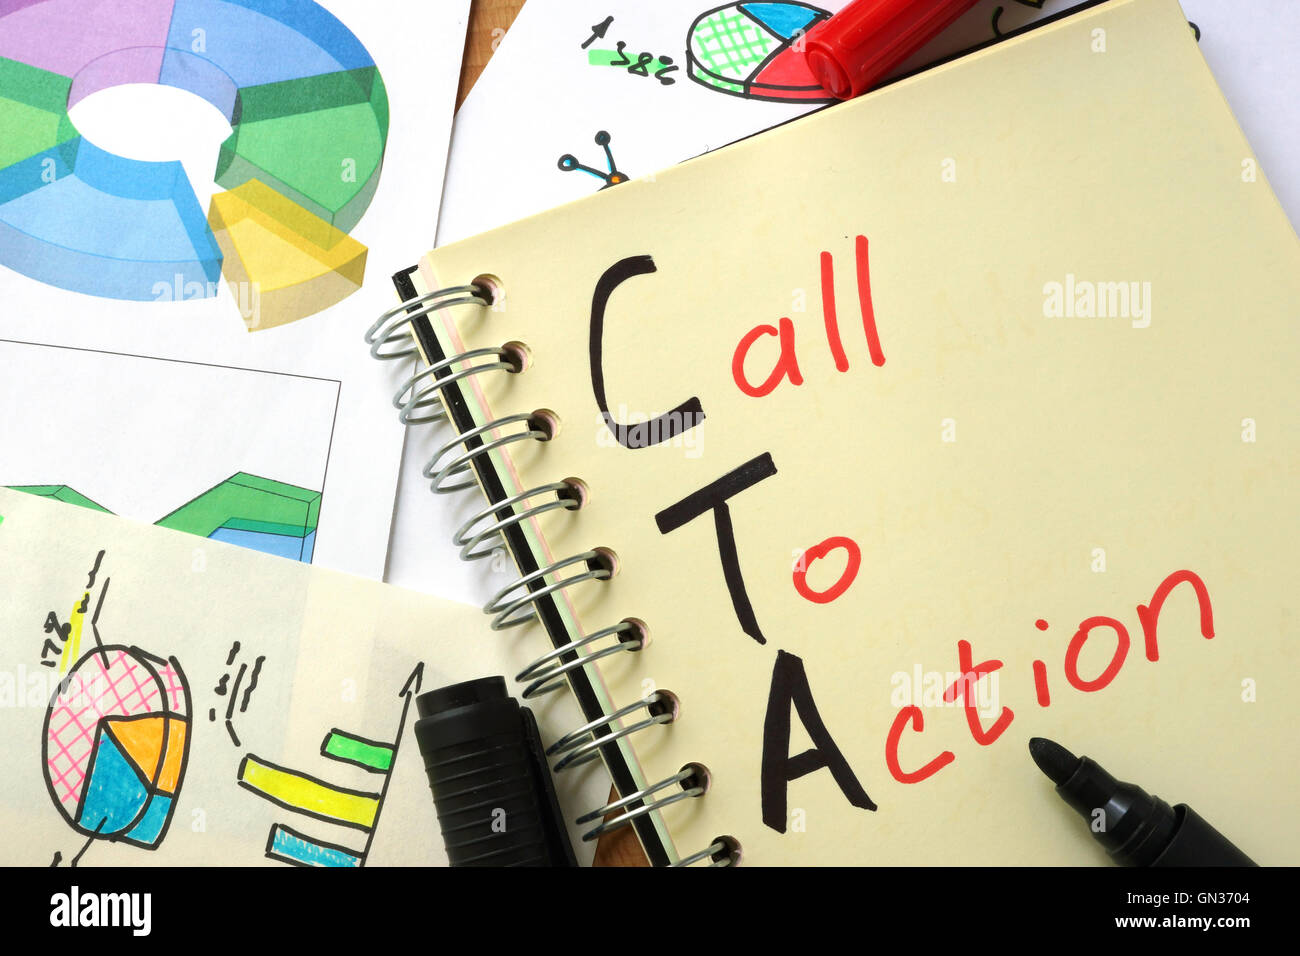 Notebook with  sign CTA call to action and charts. Stock Photo